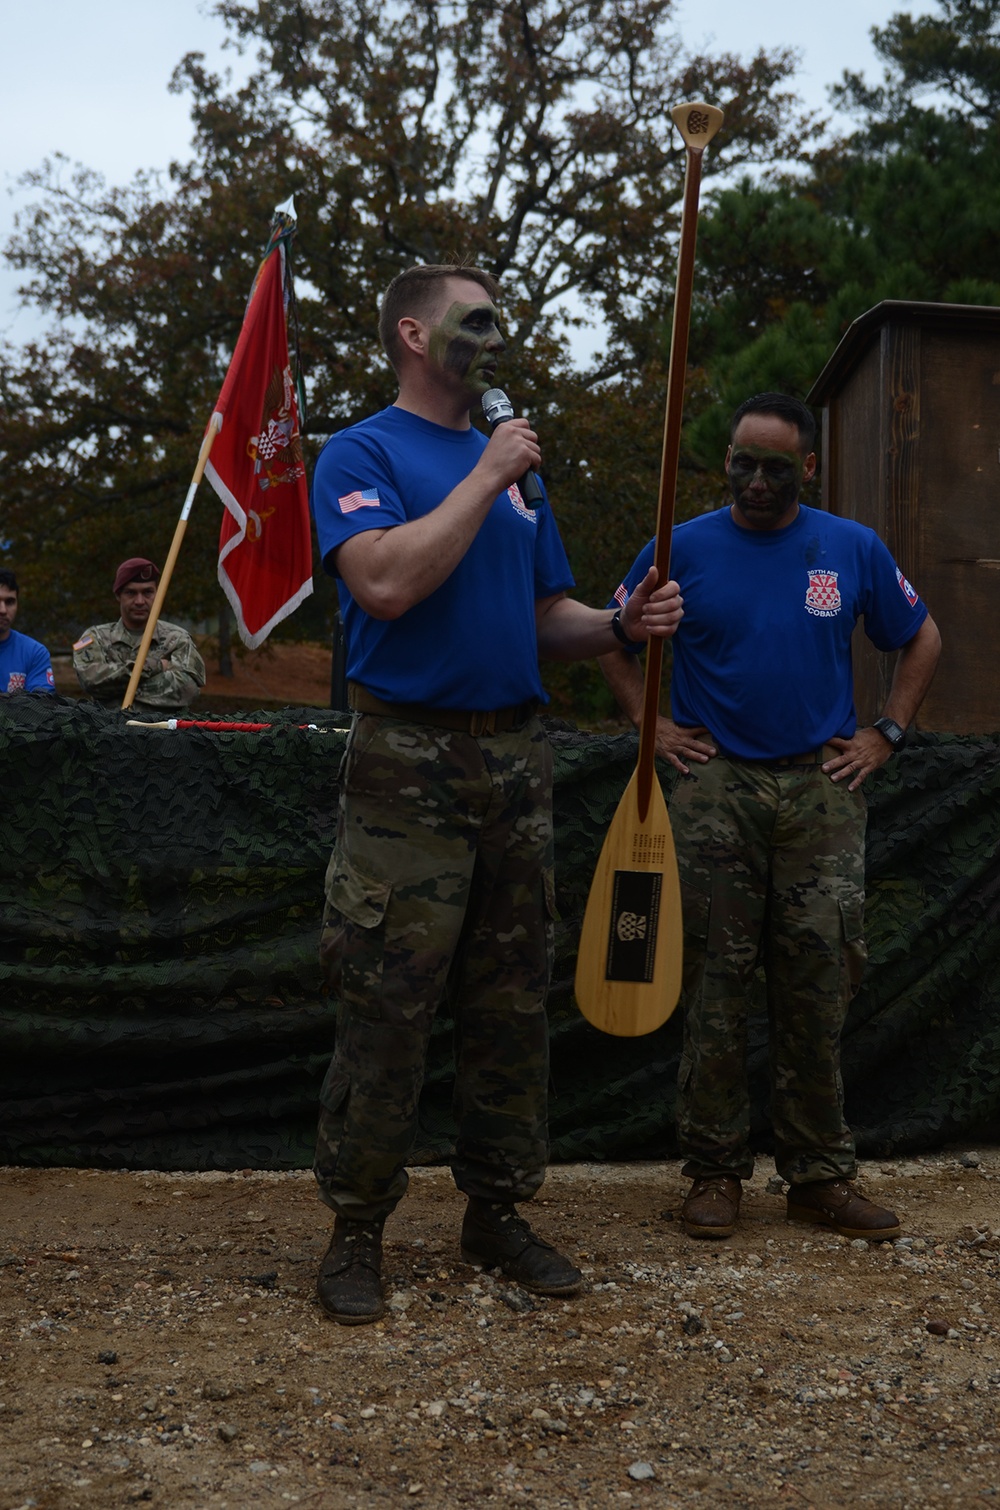 307th BEB Paratroopers commemorate Waal River crossing